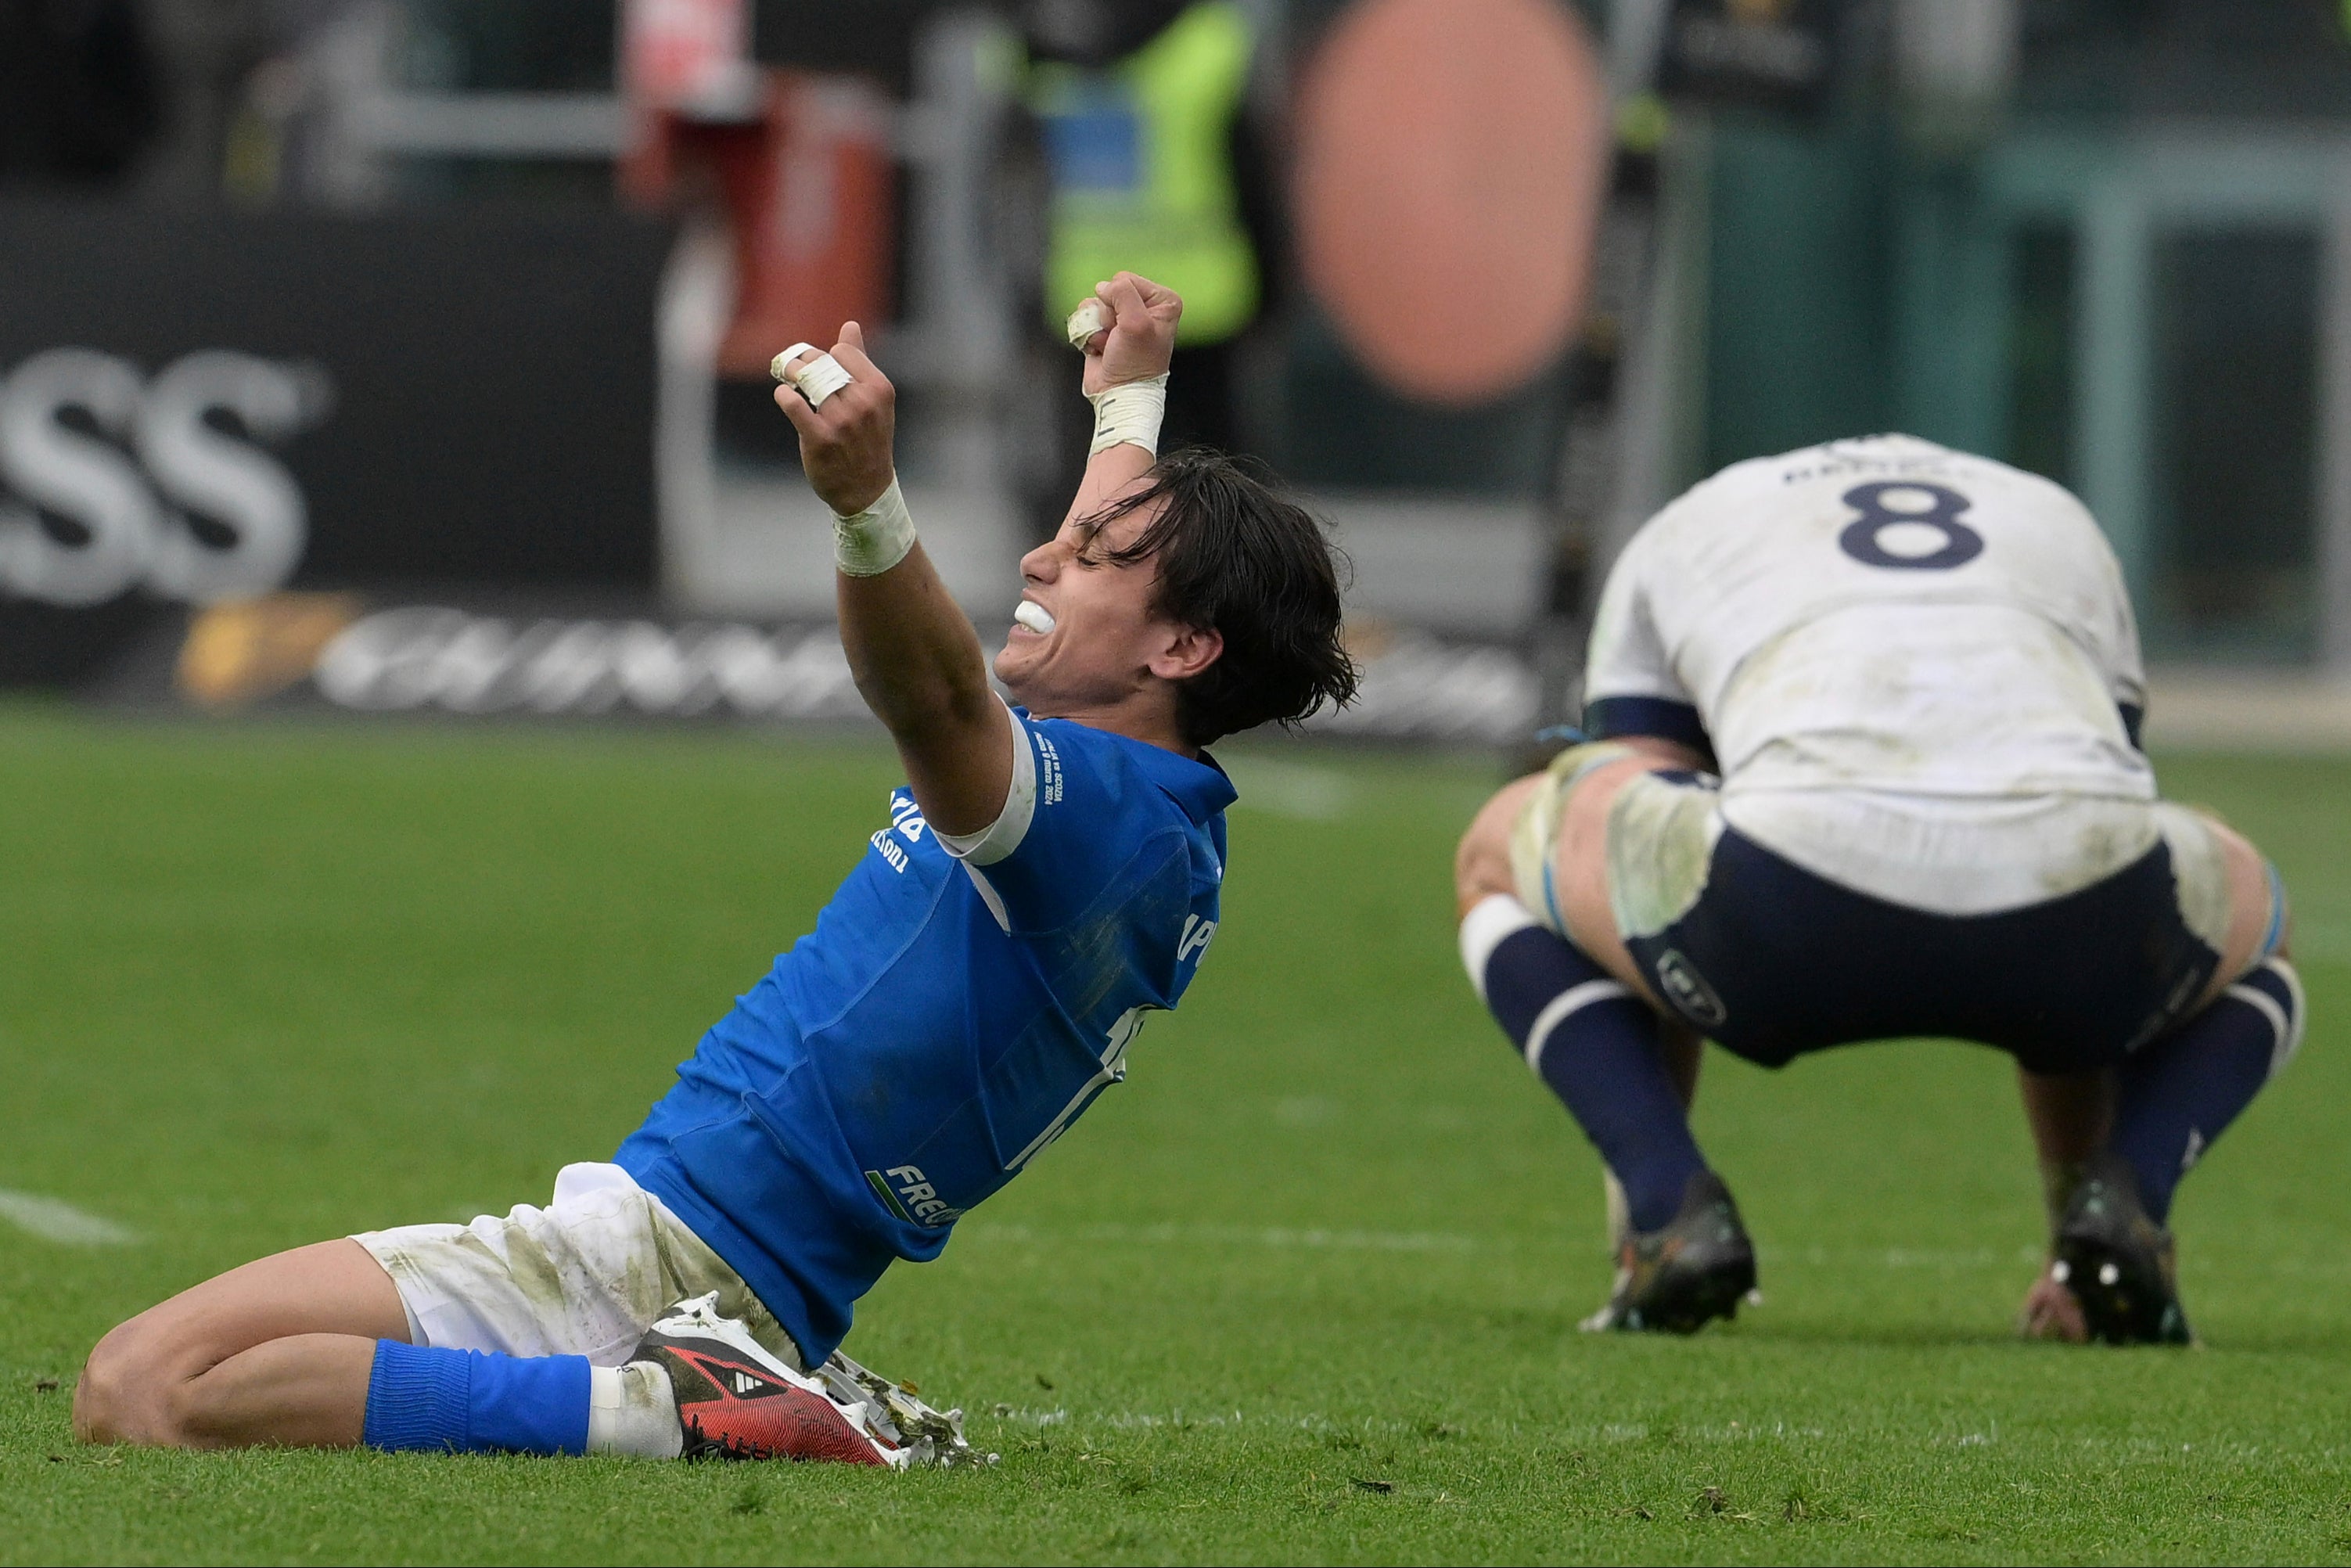 Ange Capuozzo will miss the Six Nations decider against Wales